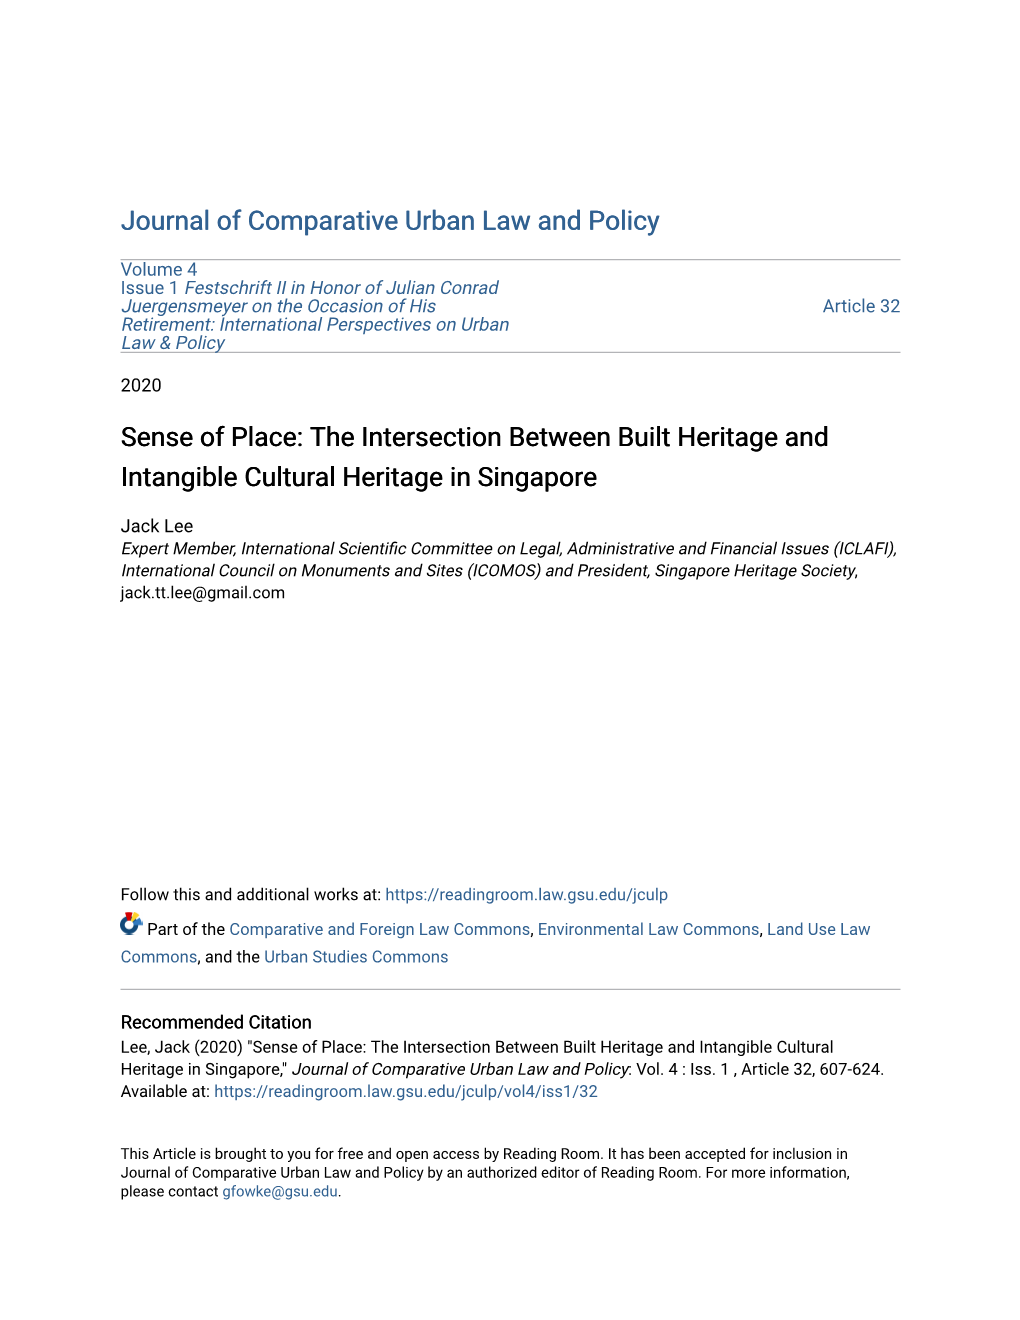 The Intersection Between Built Heritage and Intangible Cultural Heritage in Singapore